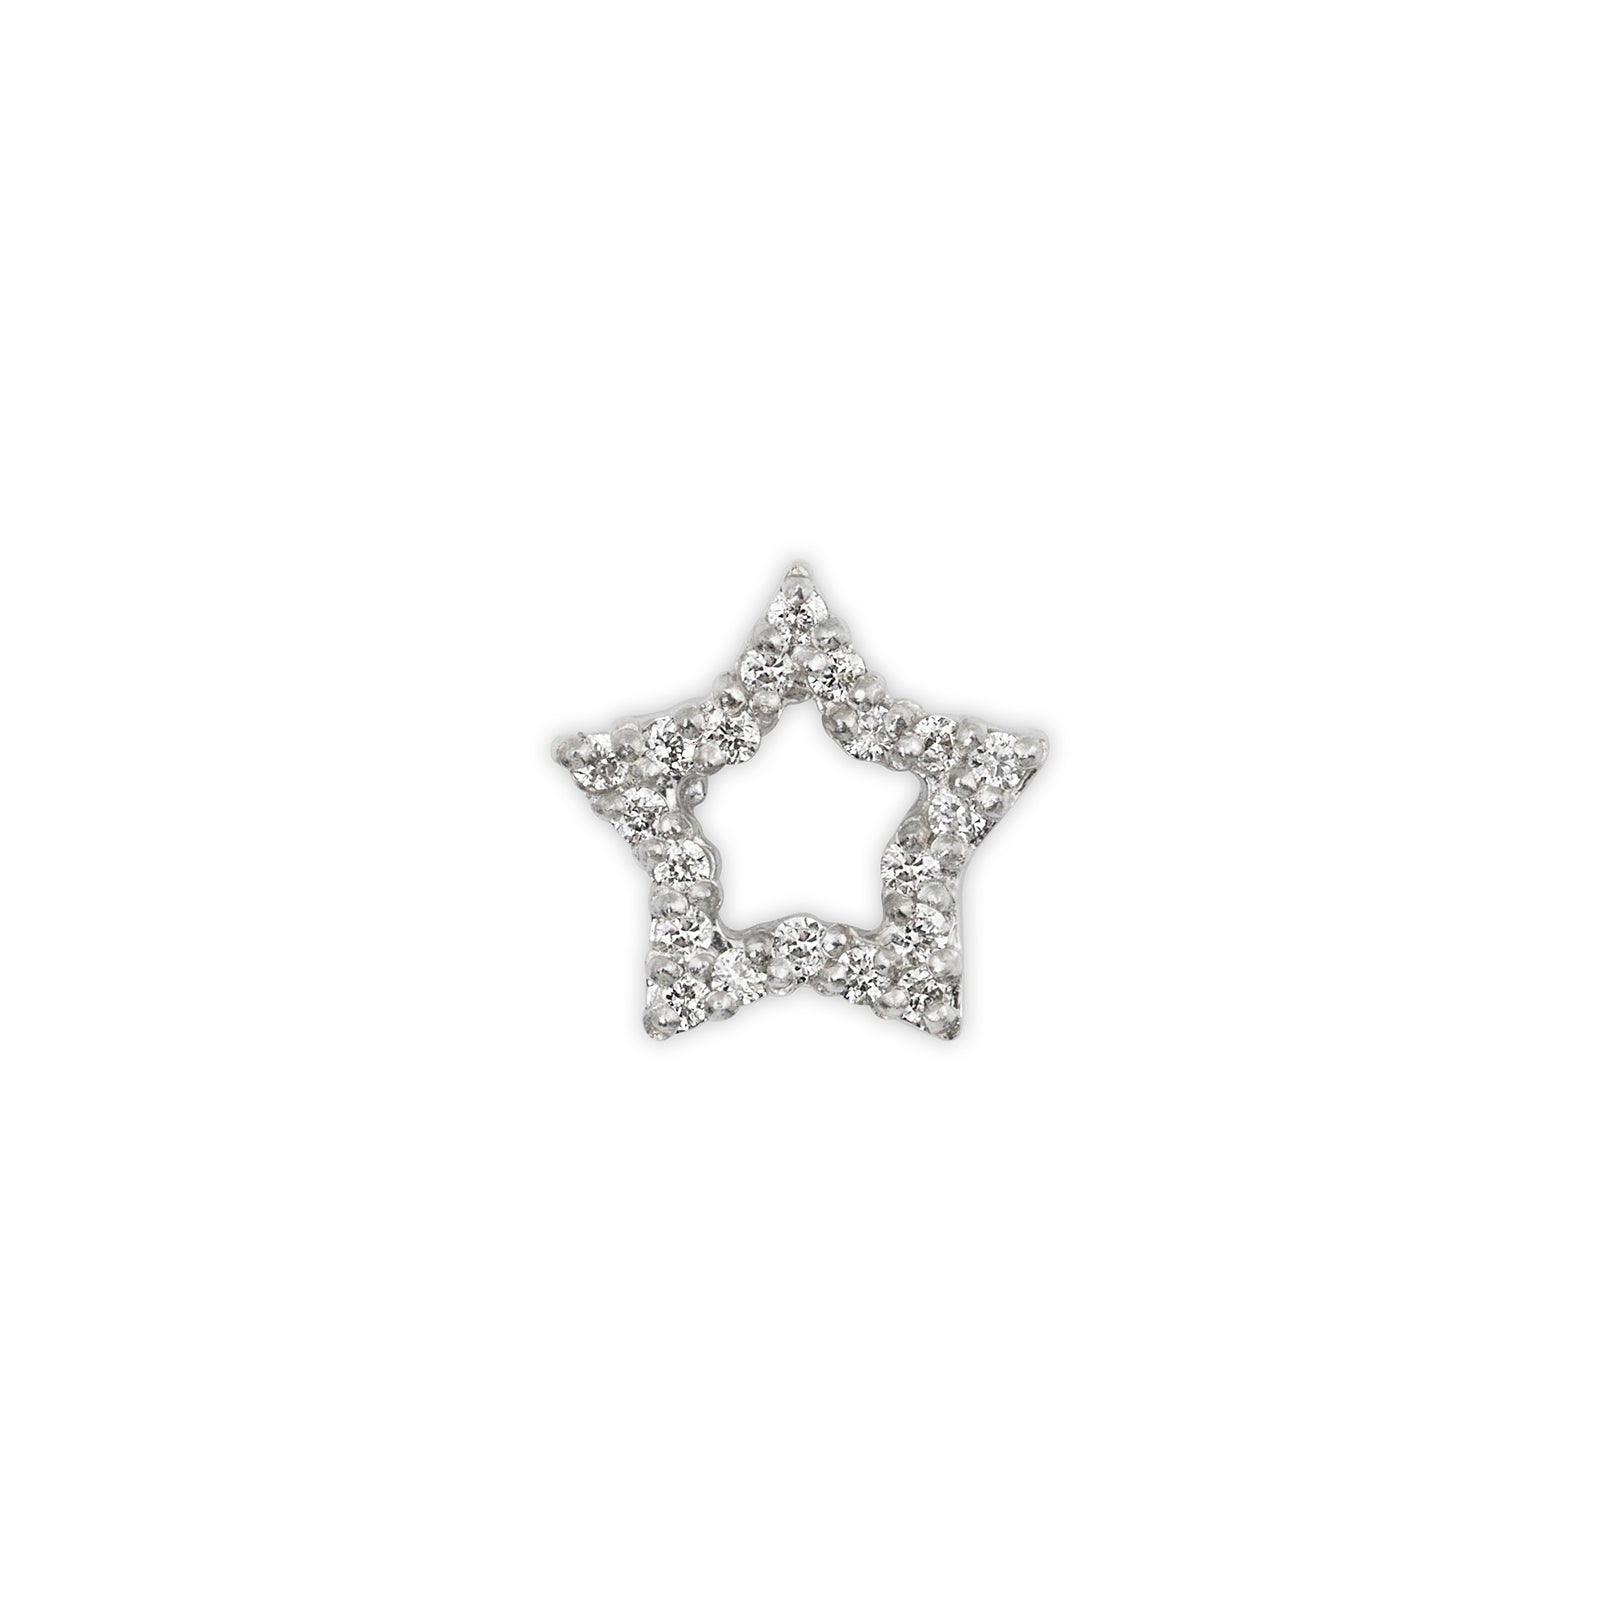 14k white gold STAR charms for ORMS hoop earrings in a pair